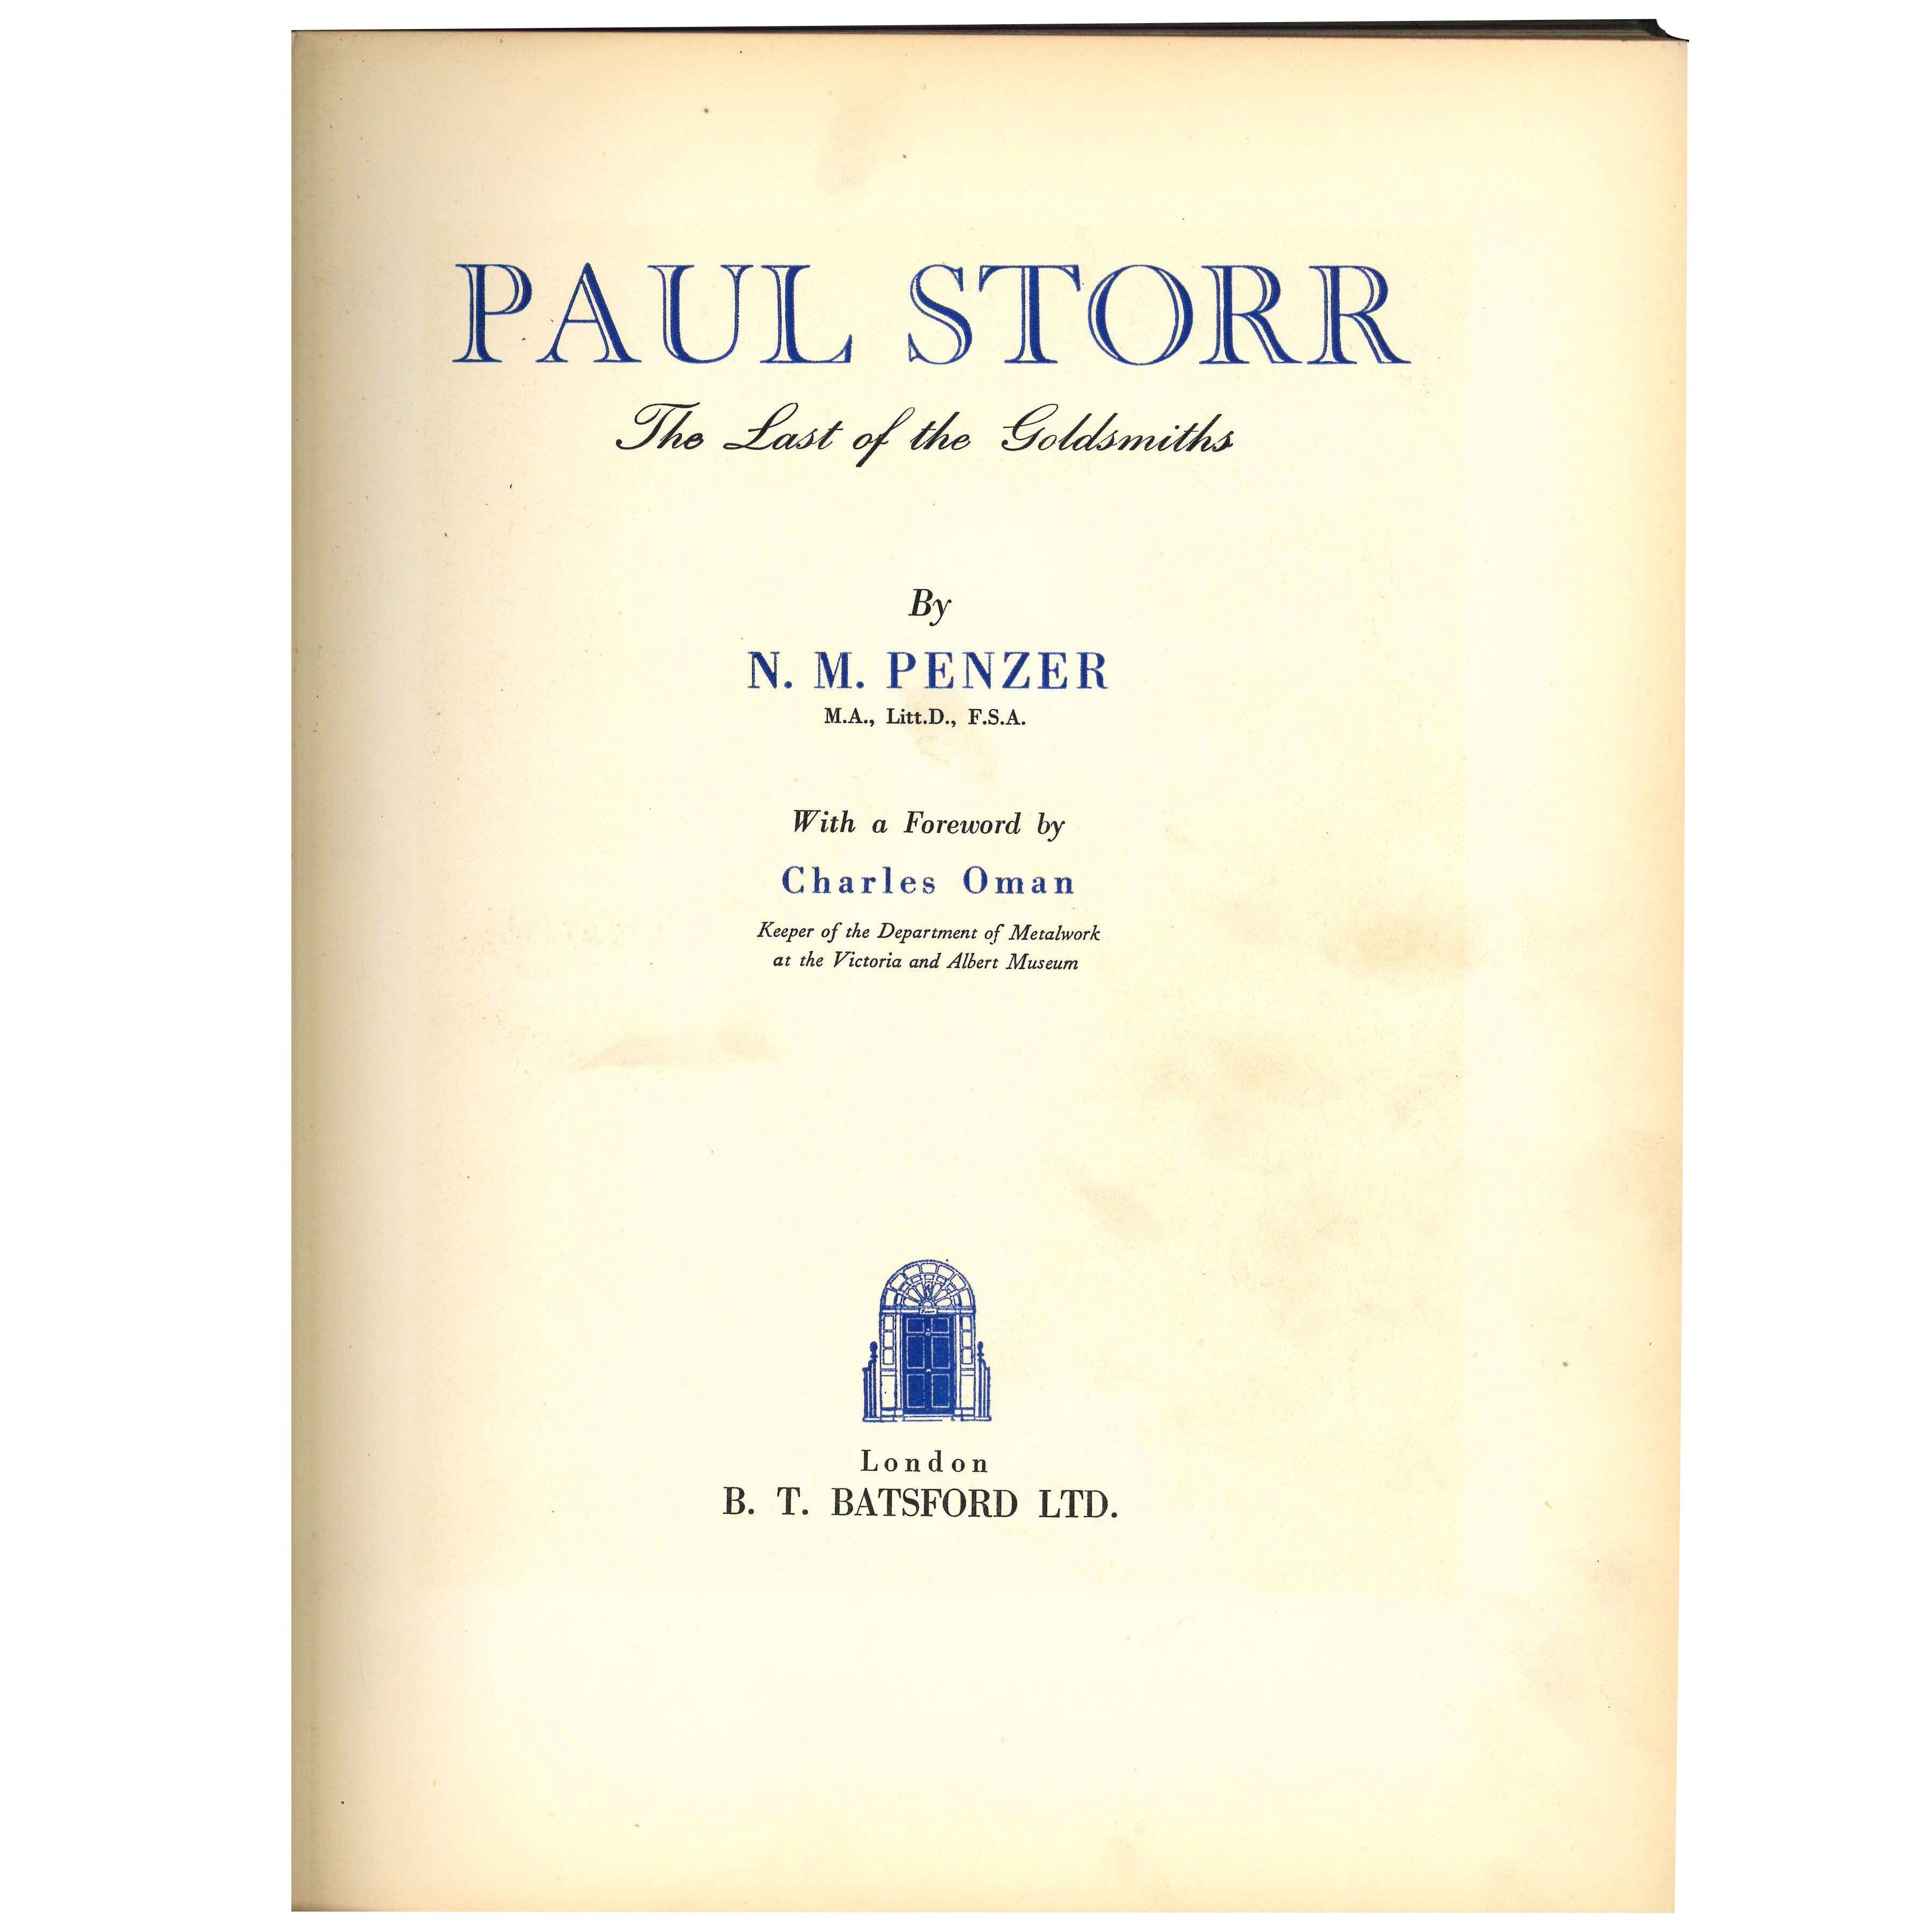 PAUL STORR - The Last of the Goldsmiths. Book